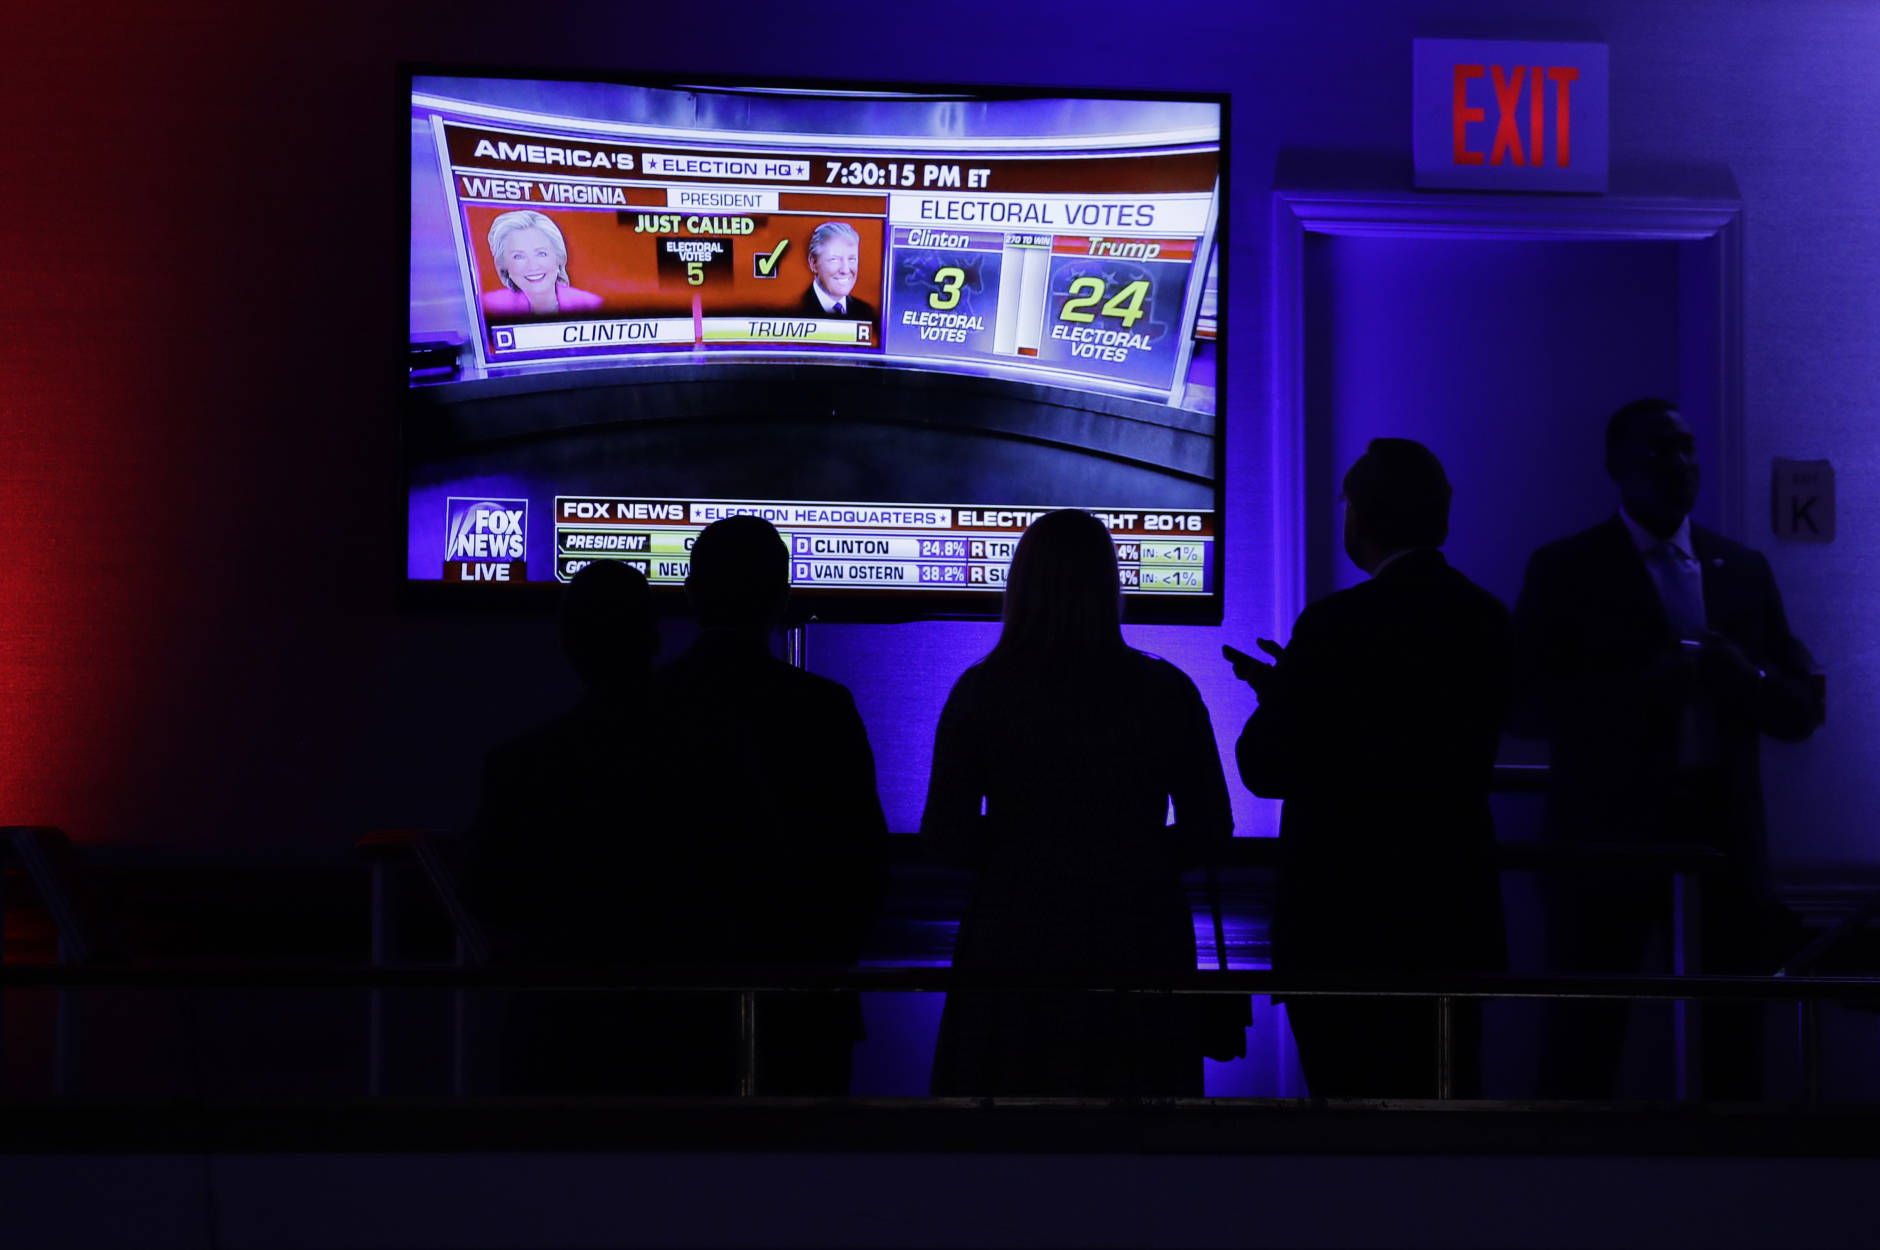 Supporters gather around the monitor to check the early election results during Republican presidential candidate Donald Trump's election night rally, Tuesday, Nov. 8, 2016, in New York. (AP Photo/John Locher)